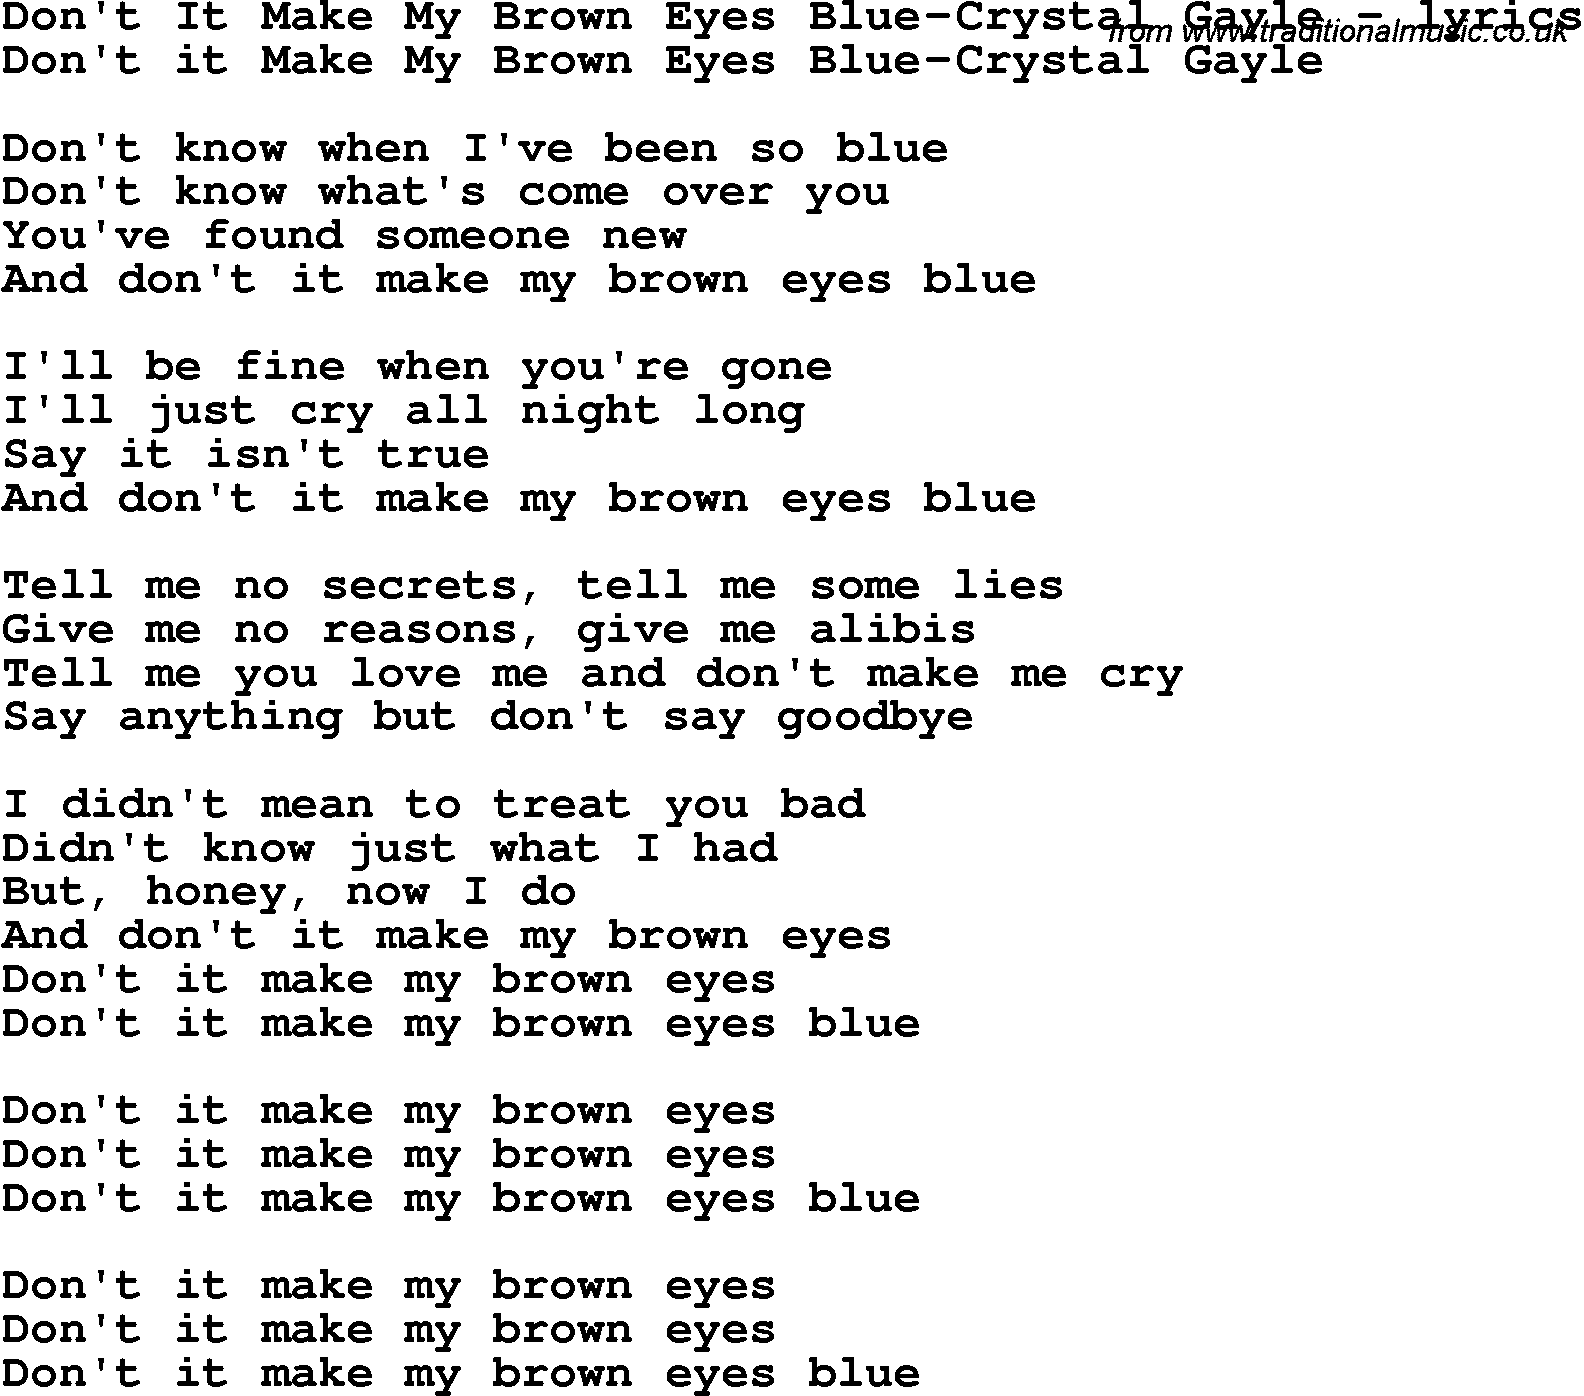 Love Song Lyrics for: Don't It Make My Brown Eyes Blue-Crystal Gayle